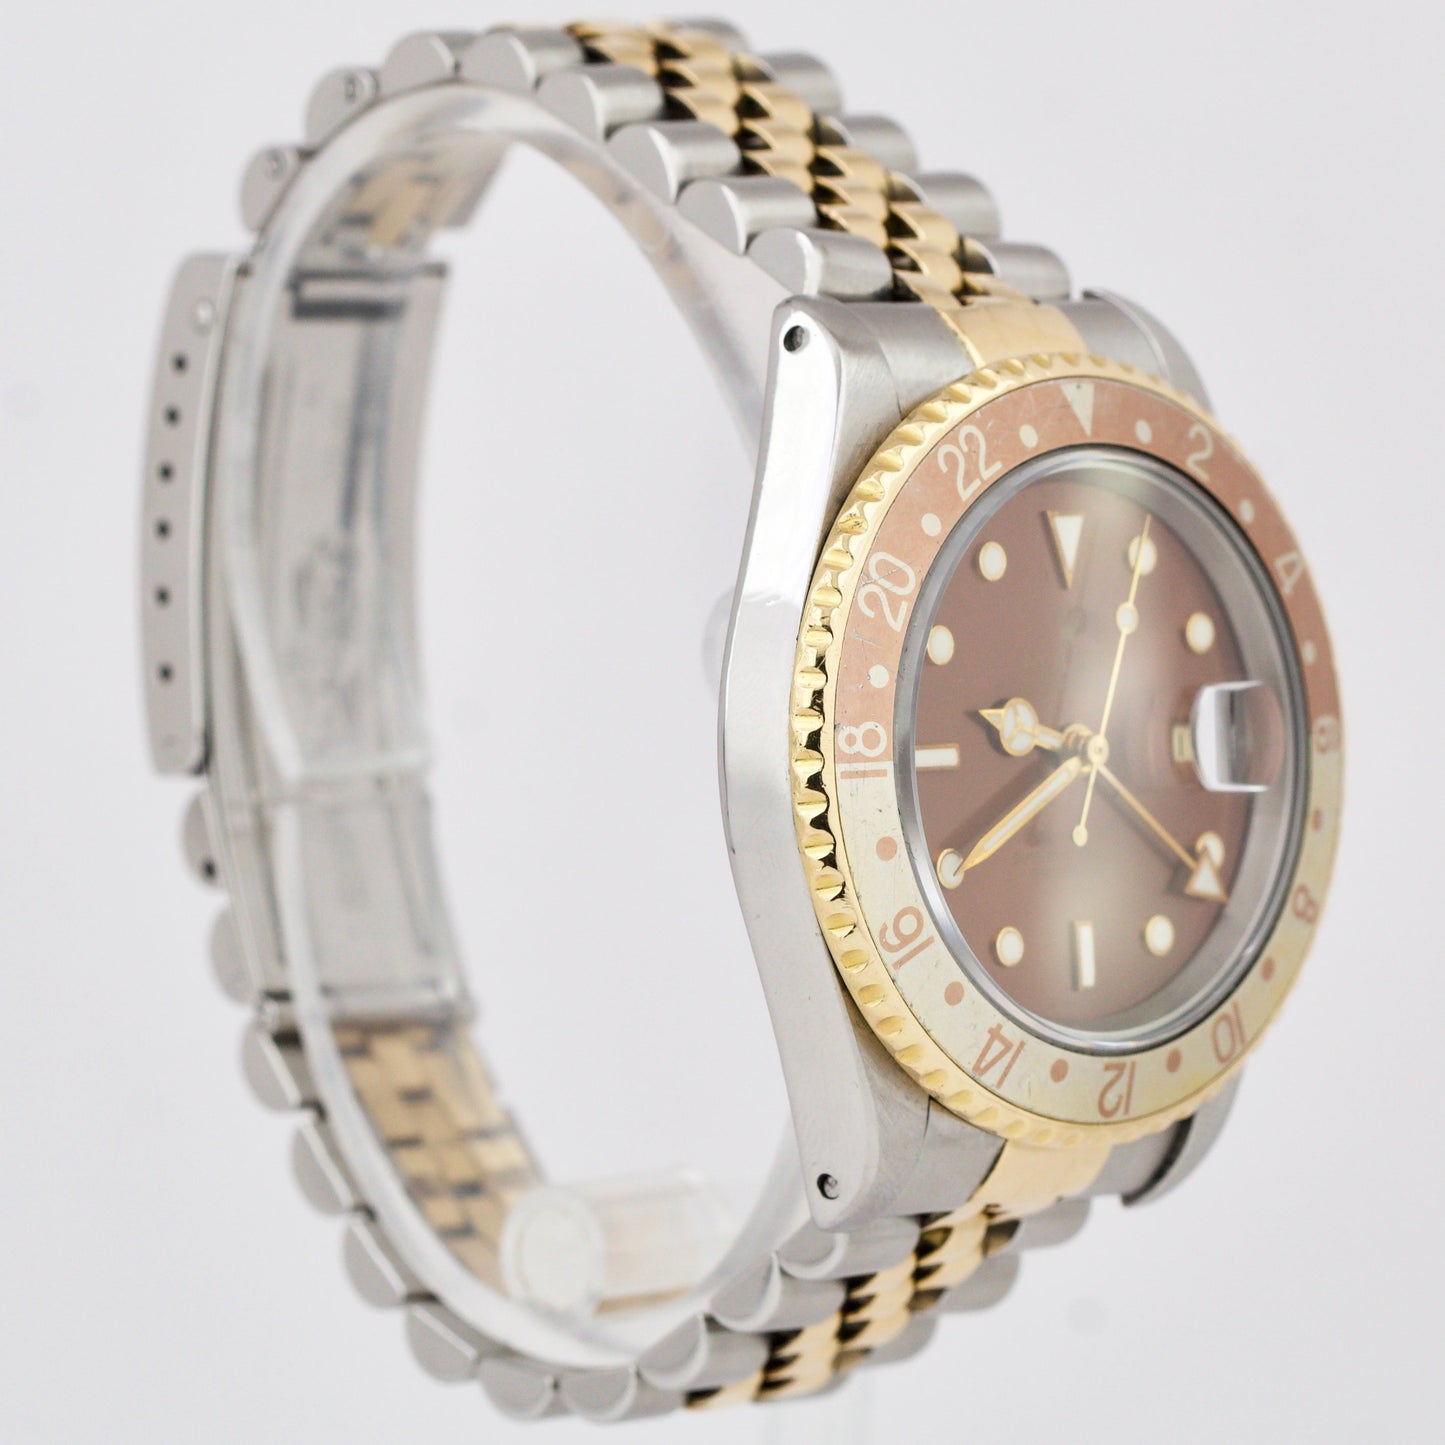 Rolex GMT-Master II Two-Tone Stainless Gold ROOT BEER Jubilee 40mm Watch 16713